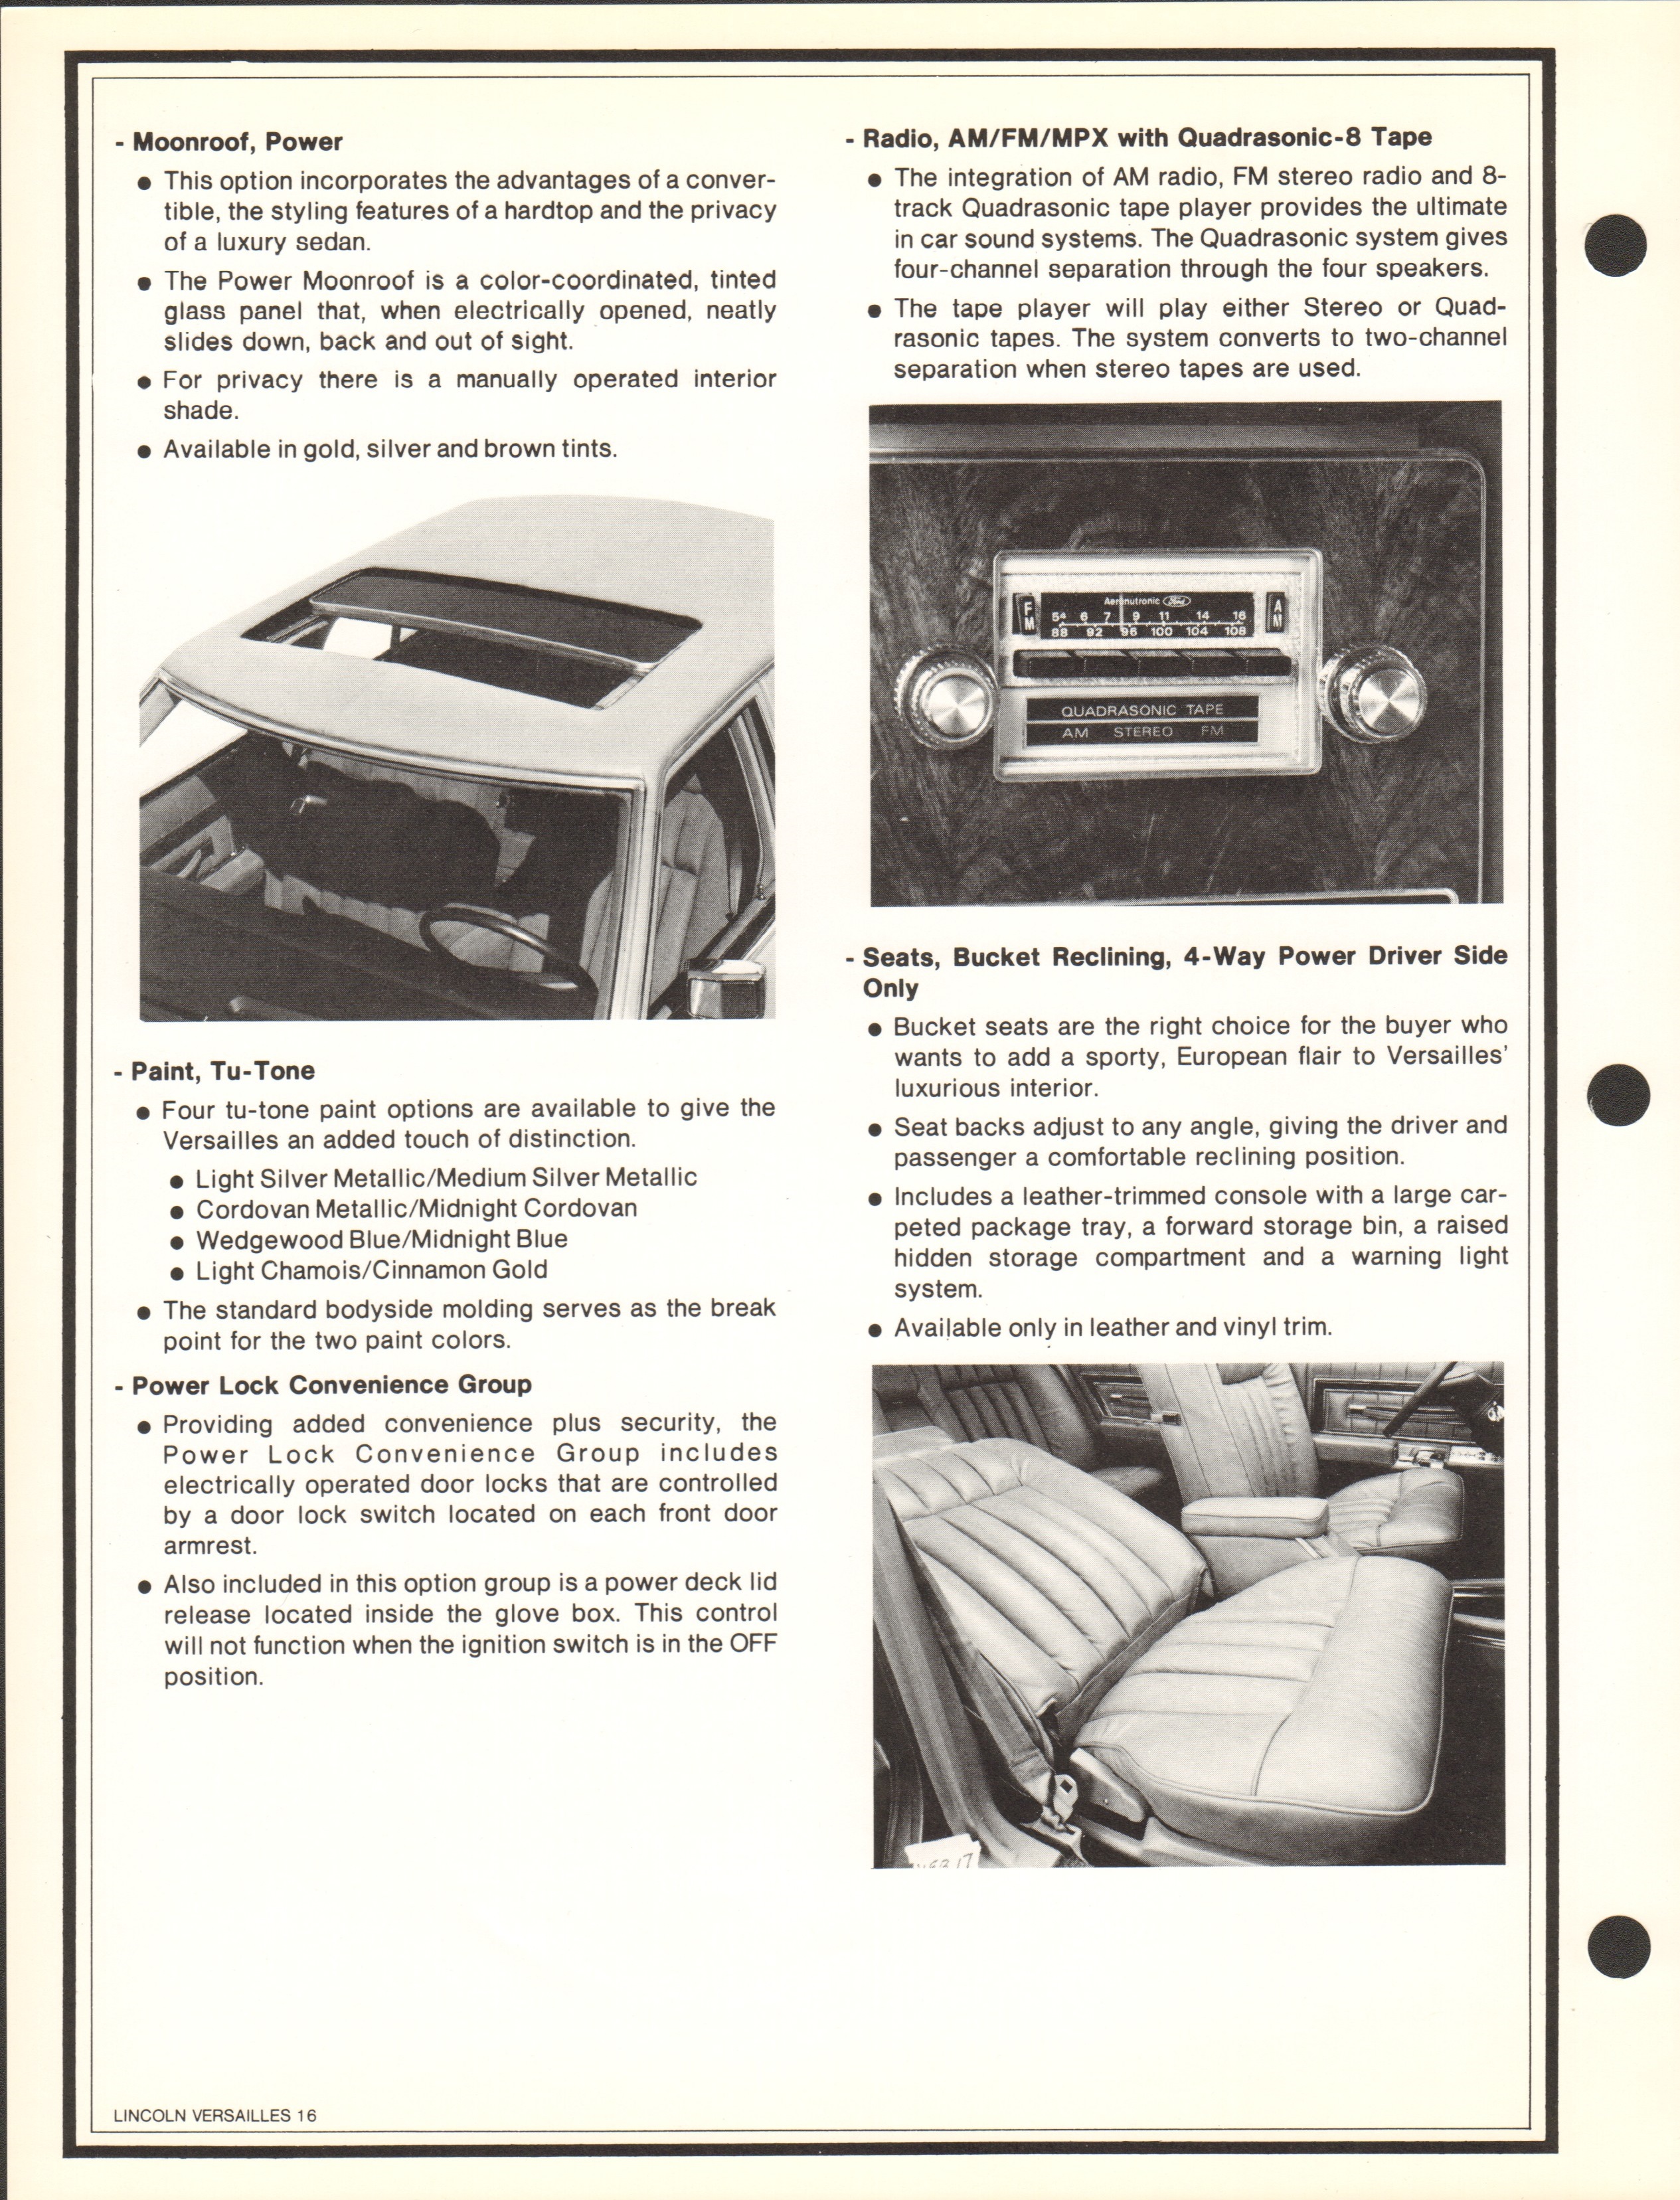 1978 Lincoln Products Fact Book